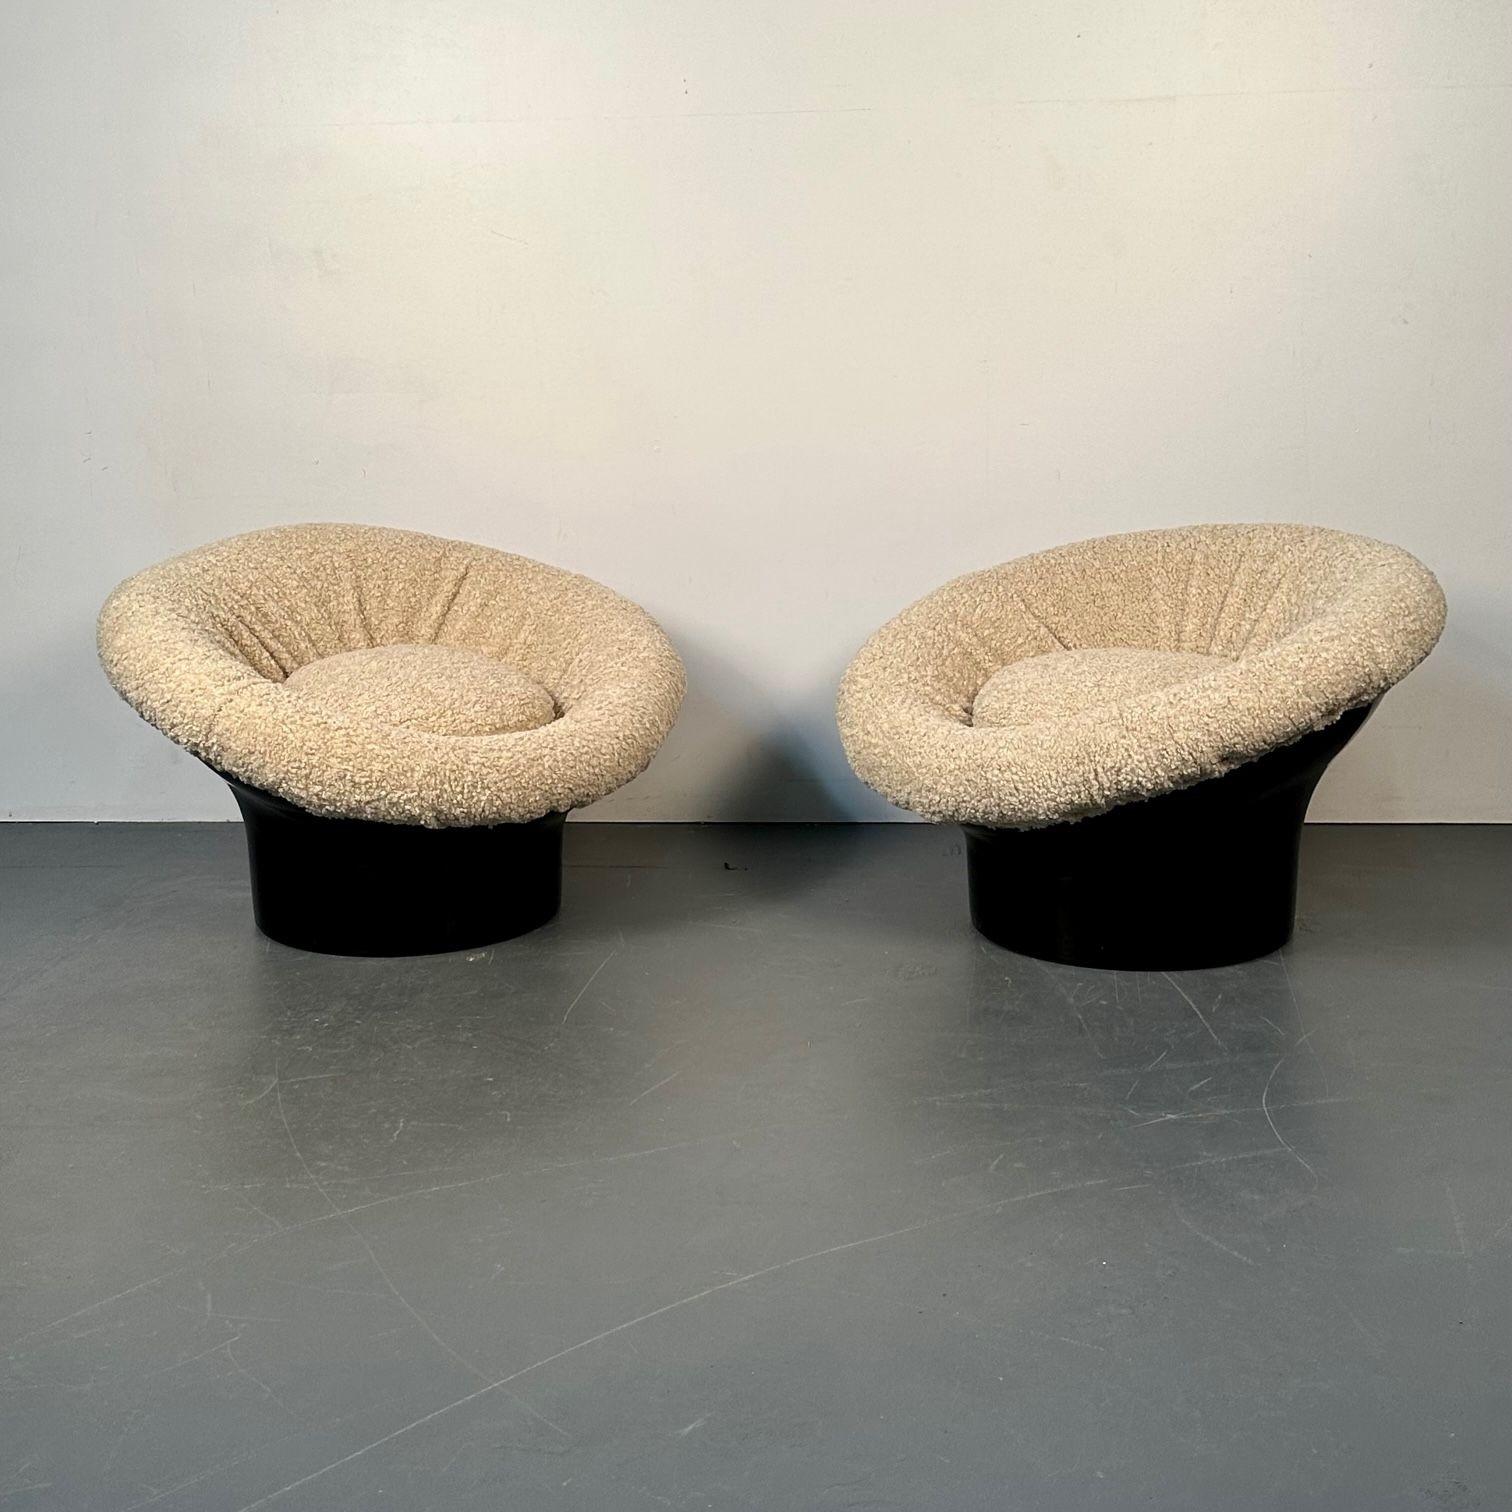 Pair of Midcentury Lacquer Lounge Chairs, Lennart Bender, Space Age Modern In Good Condition For Sale In Stamford, CT